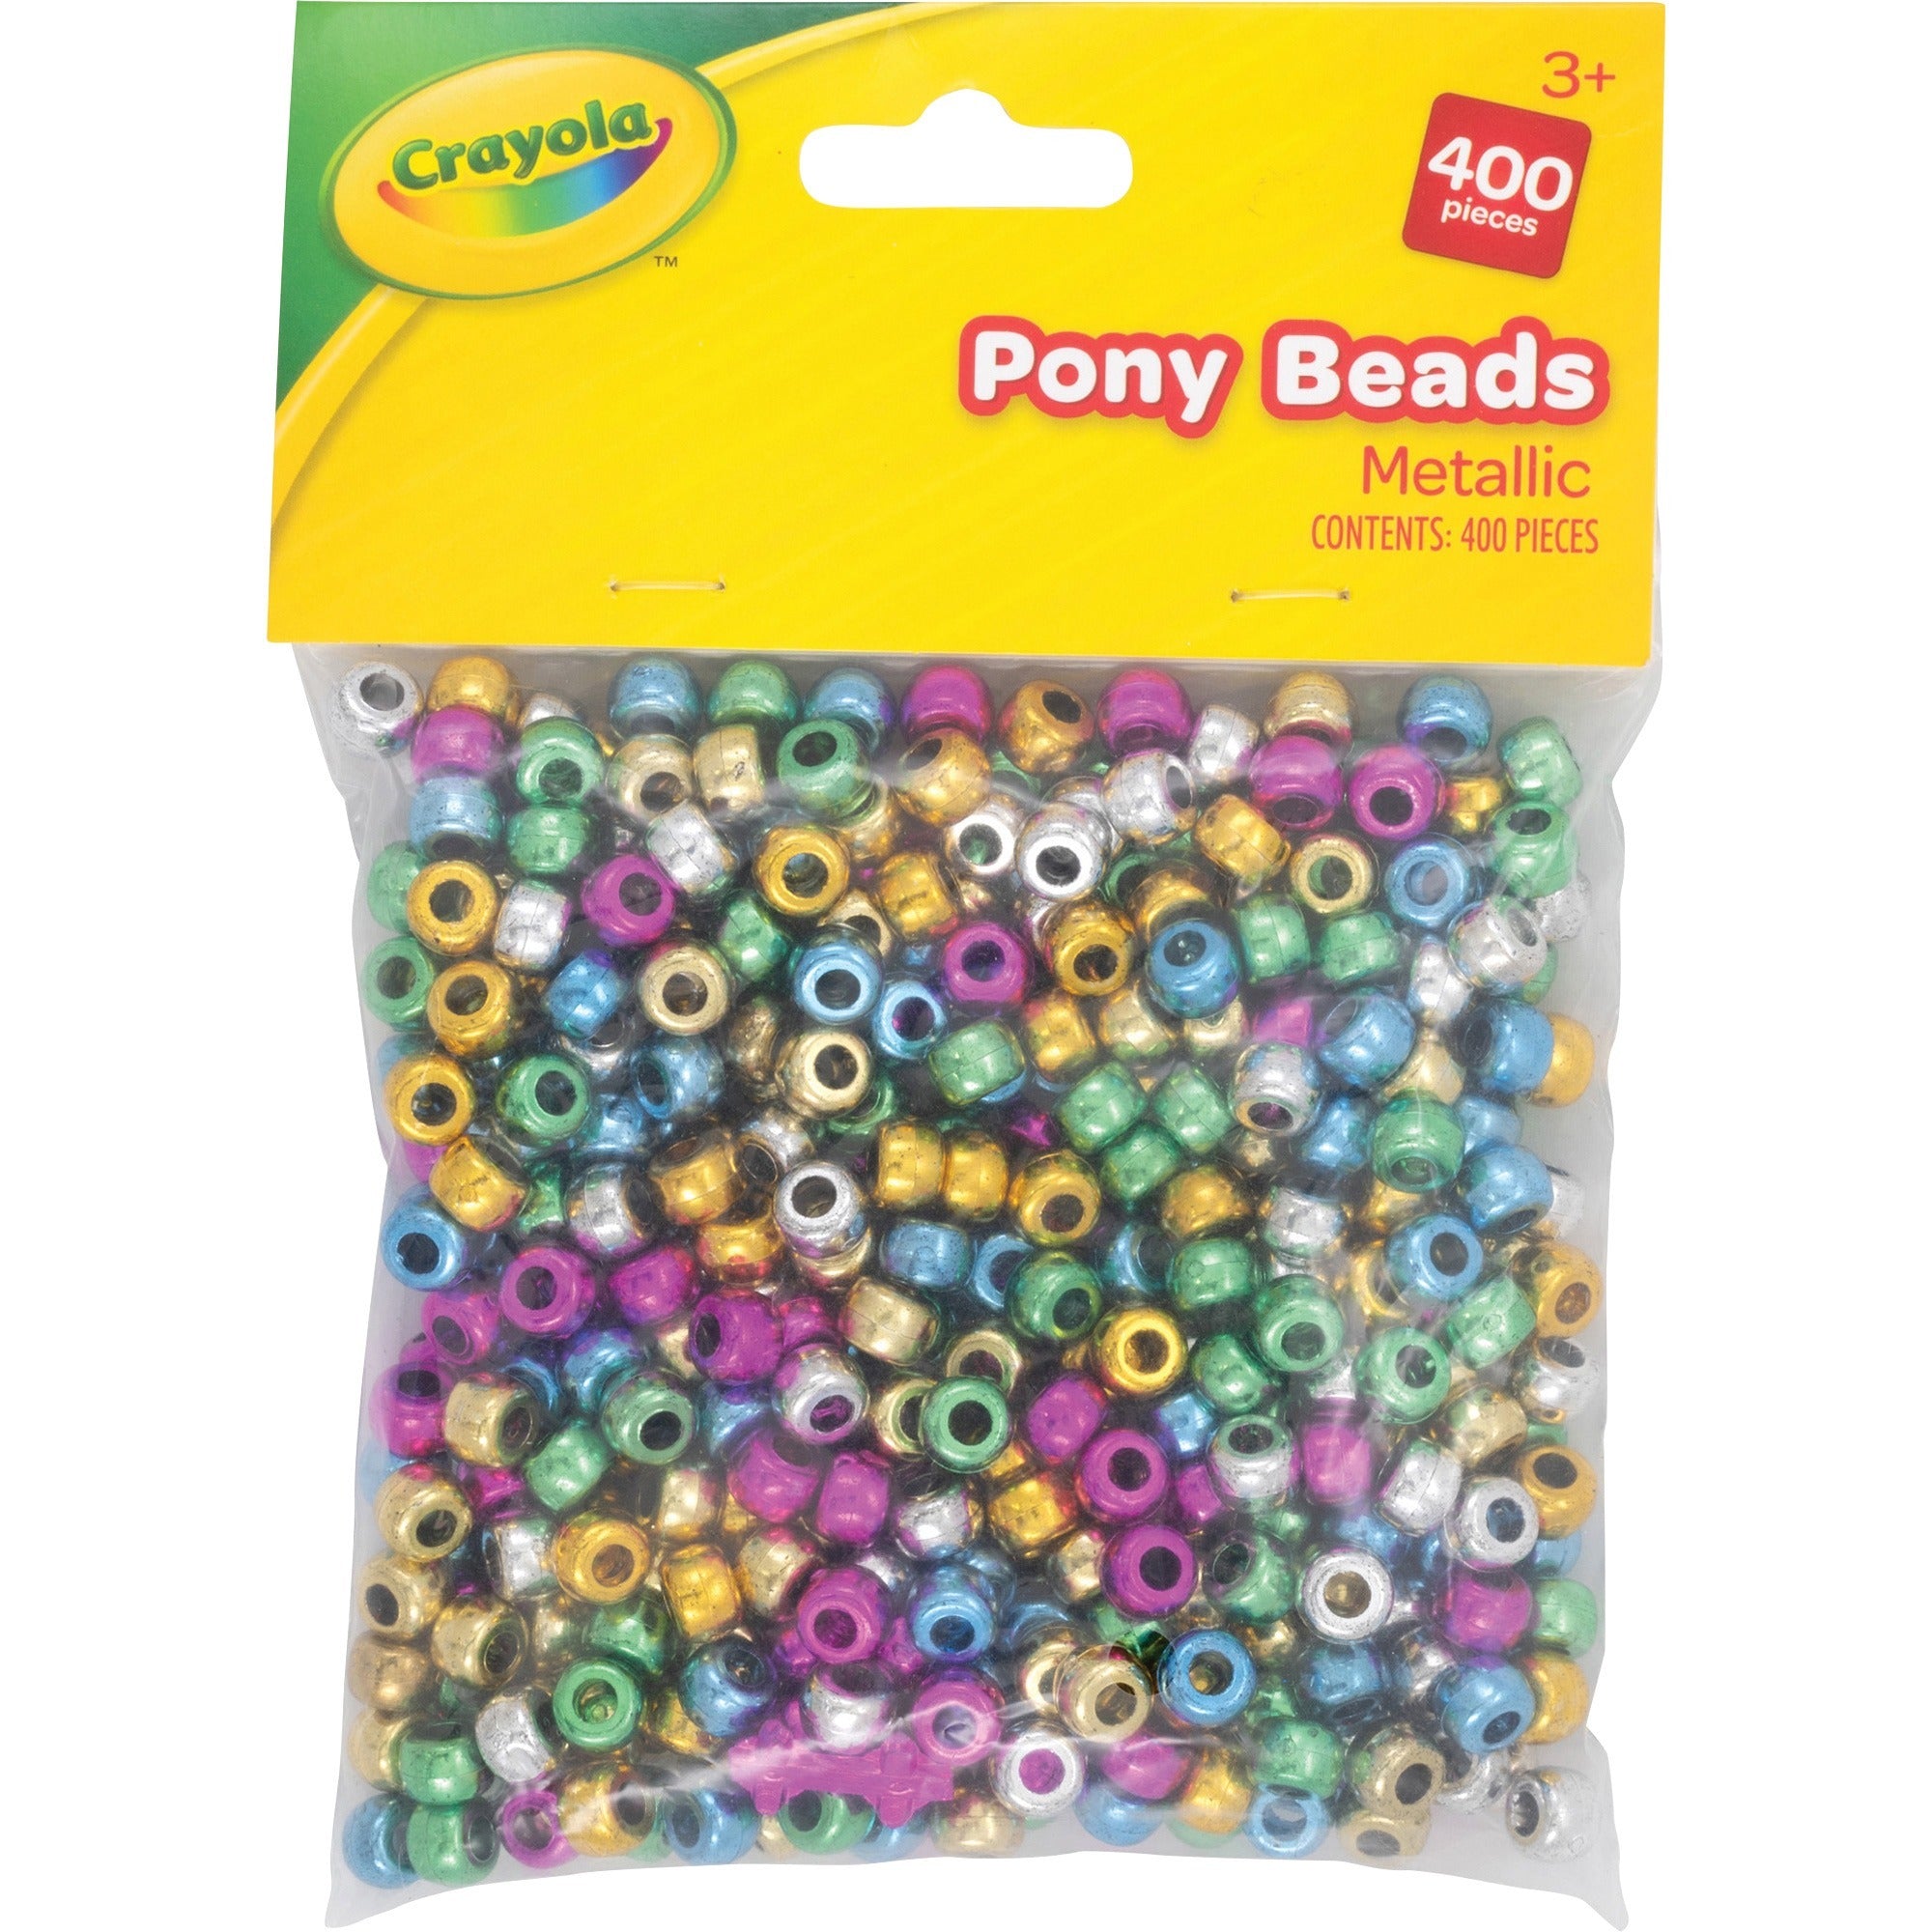 crayola-pony-beads-key-chain-project-party-classroom-necklace-bracelet-400-pieces-400-pack-assorted-metallic_pacp355403cra - 1